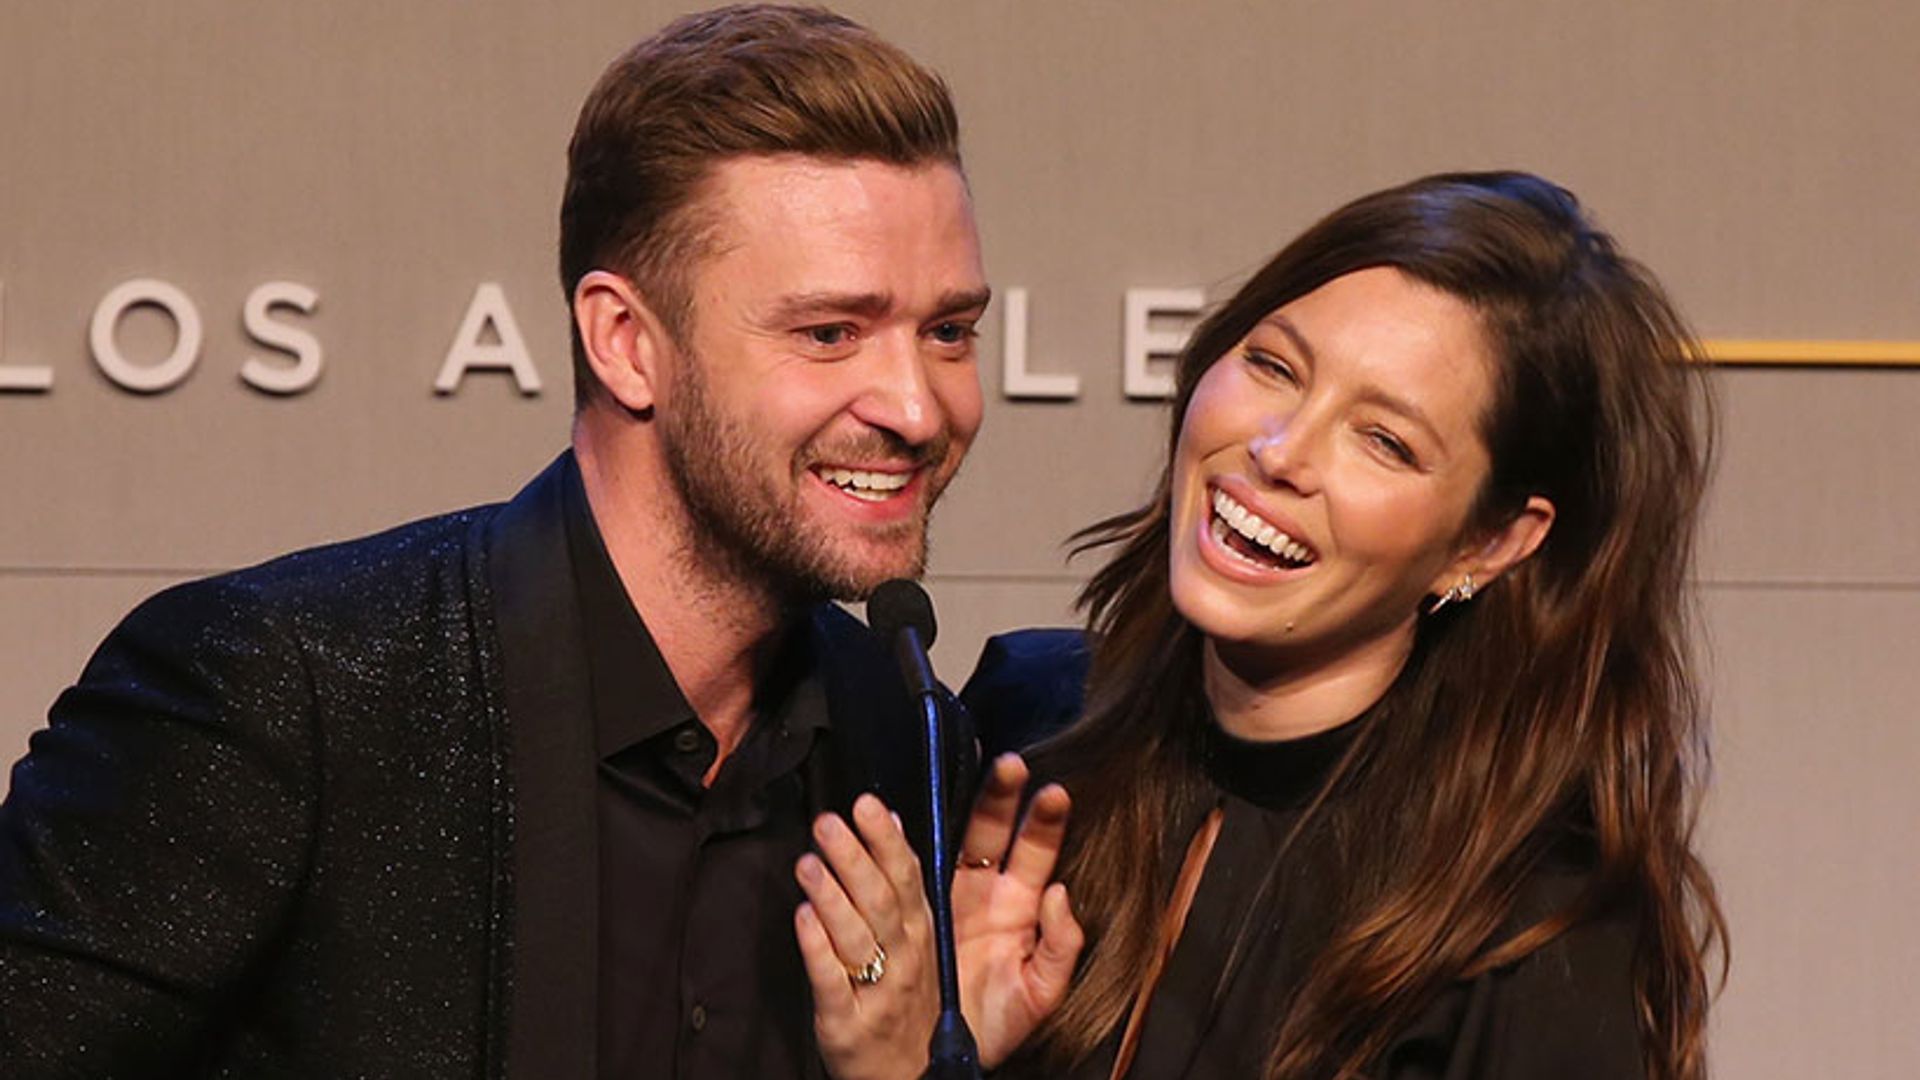 Jessica Biel shares rare picture of son, Silas - see the cute photo!